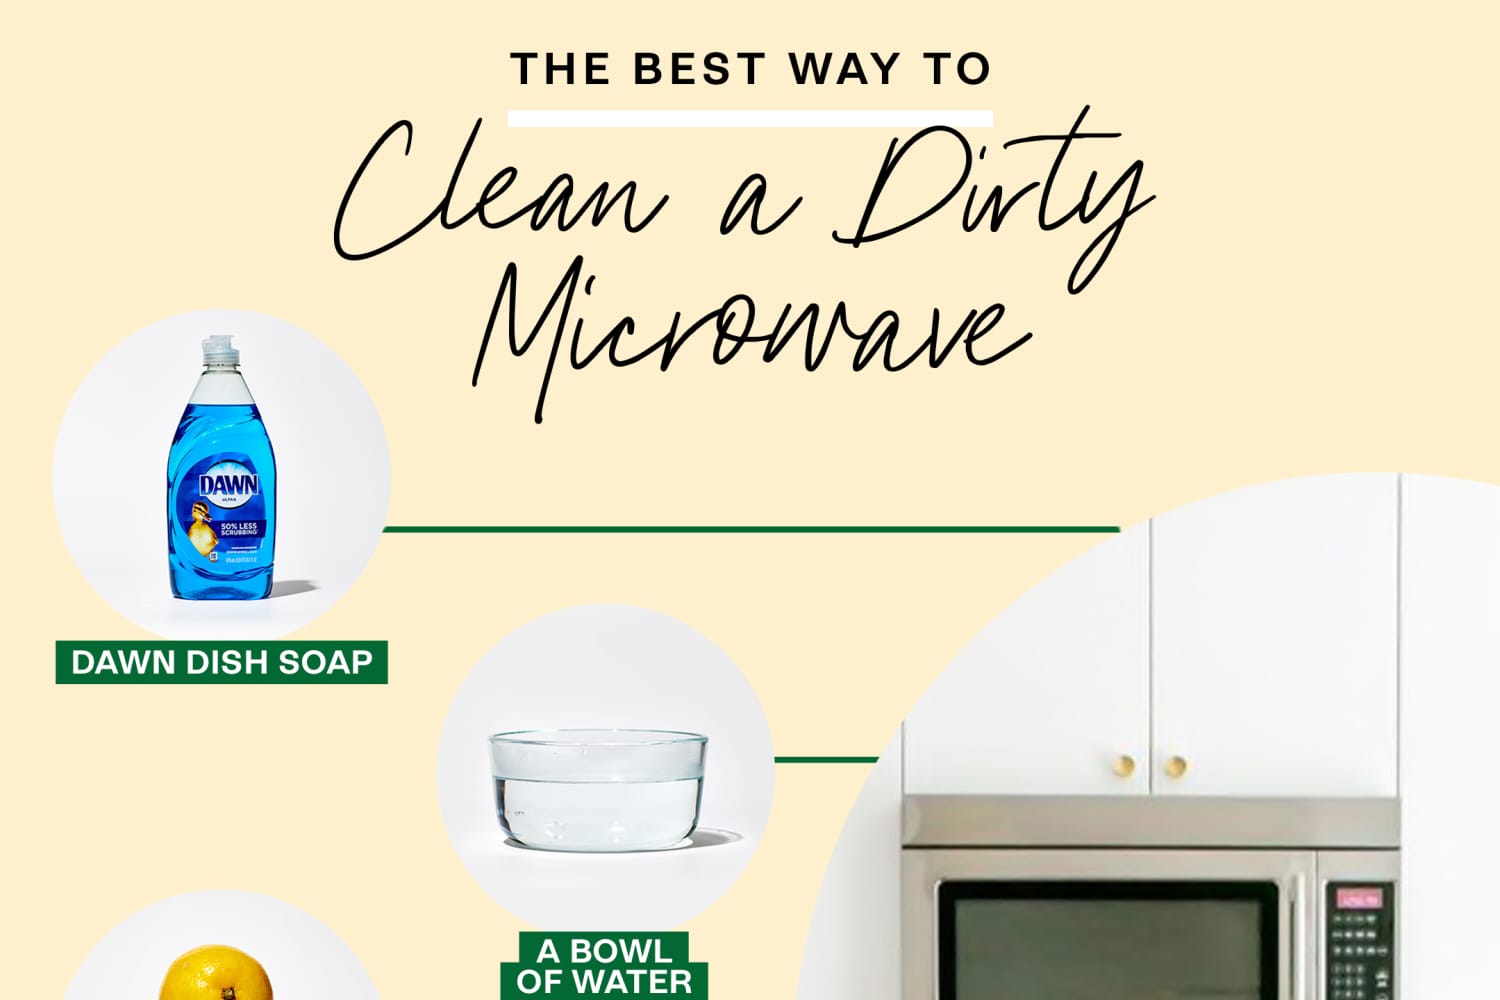 Homemade Microwave Cleaner - The Make Your Own Zone